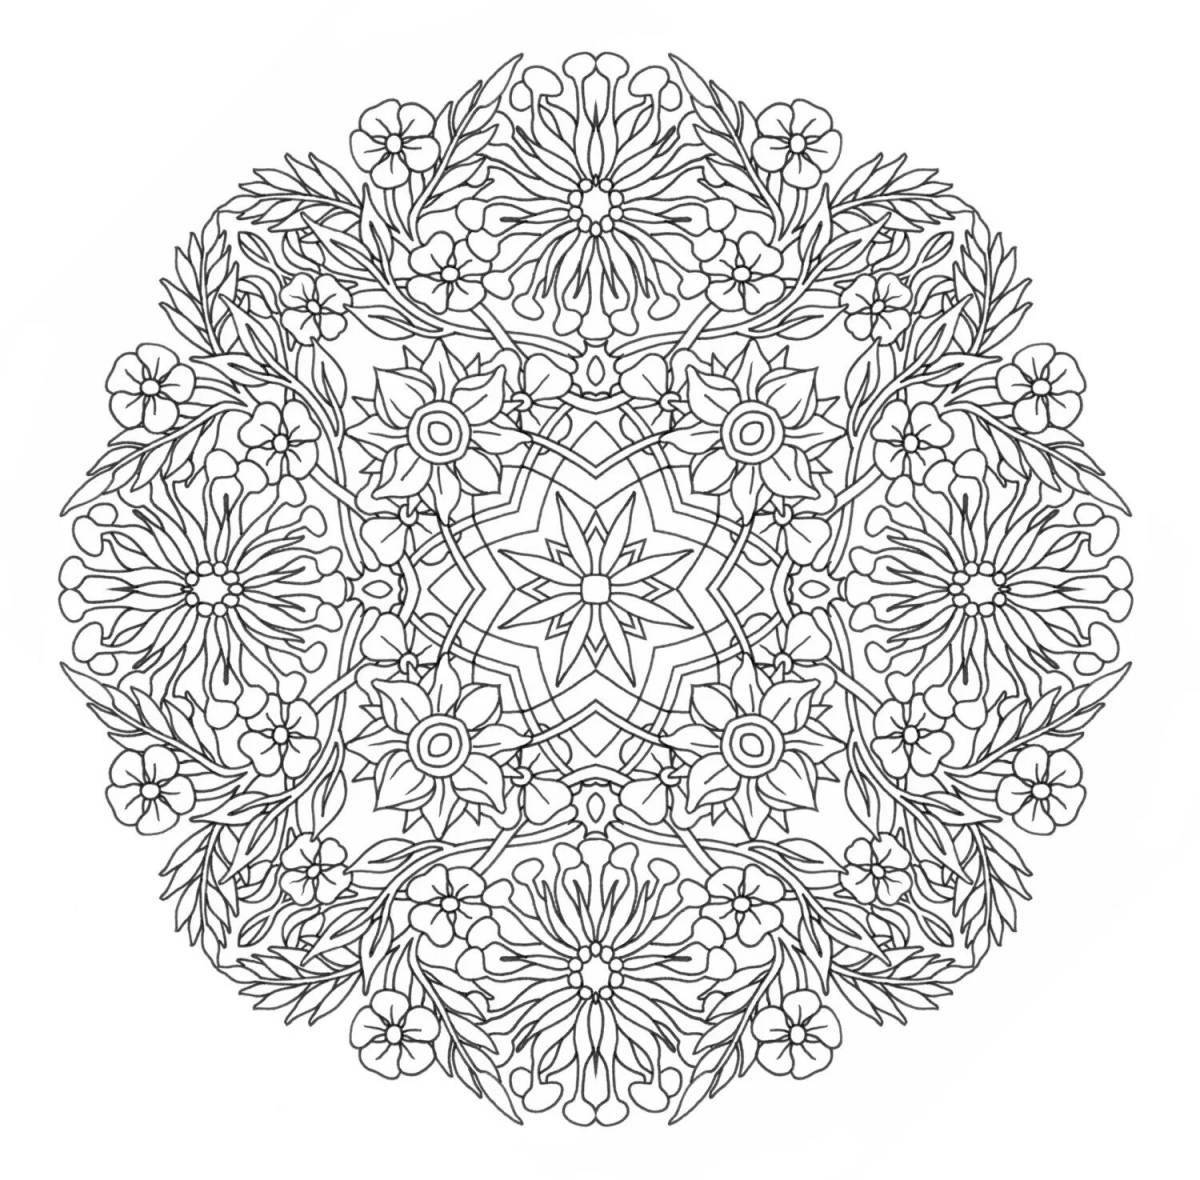 Glowing coloring book for all adult mandalas